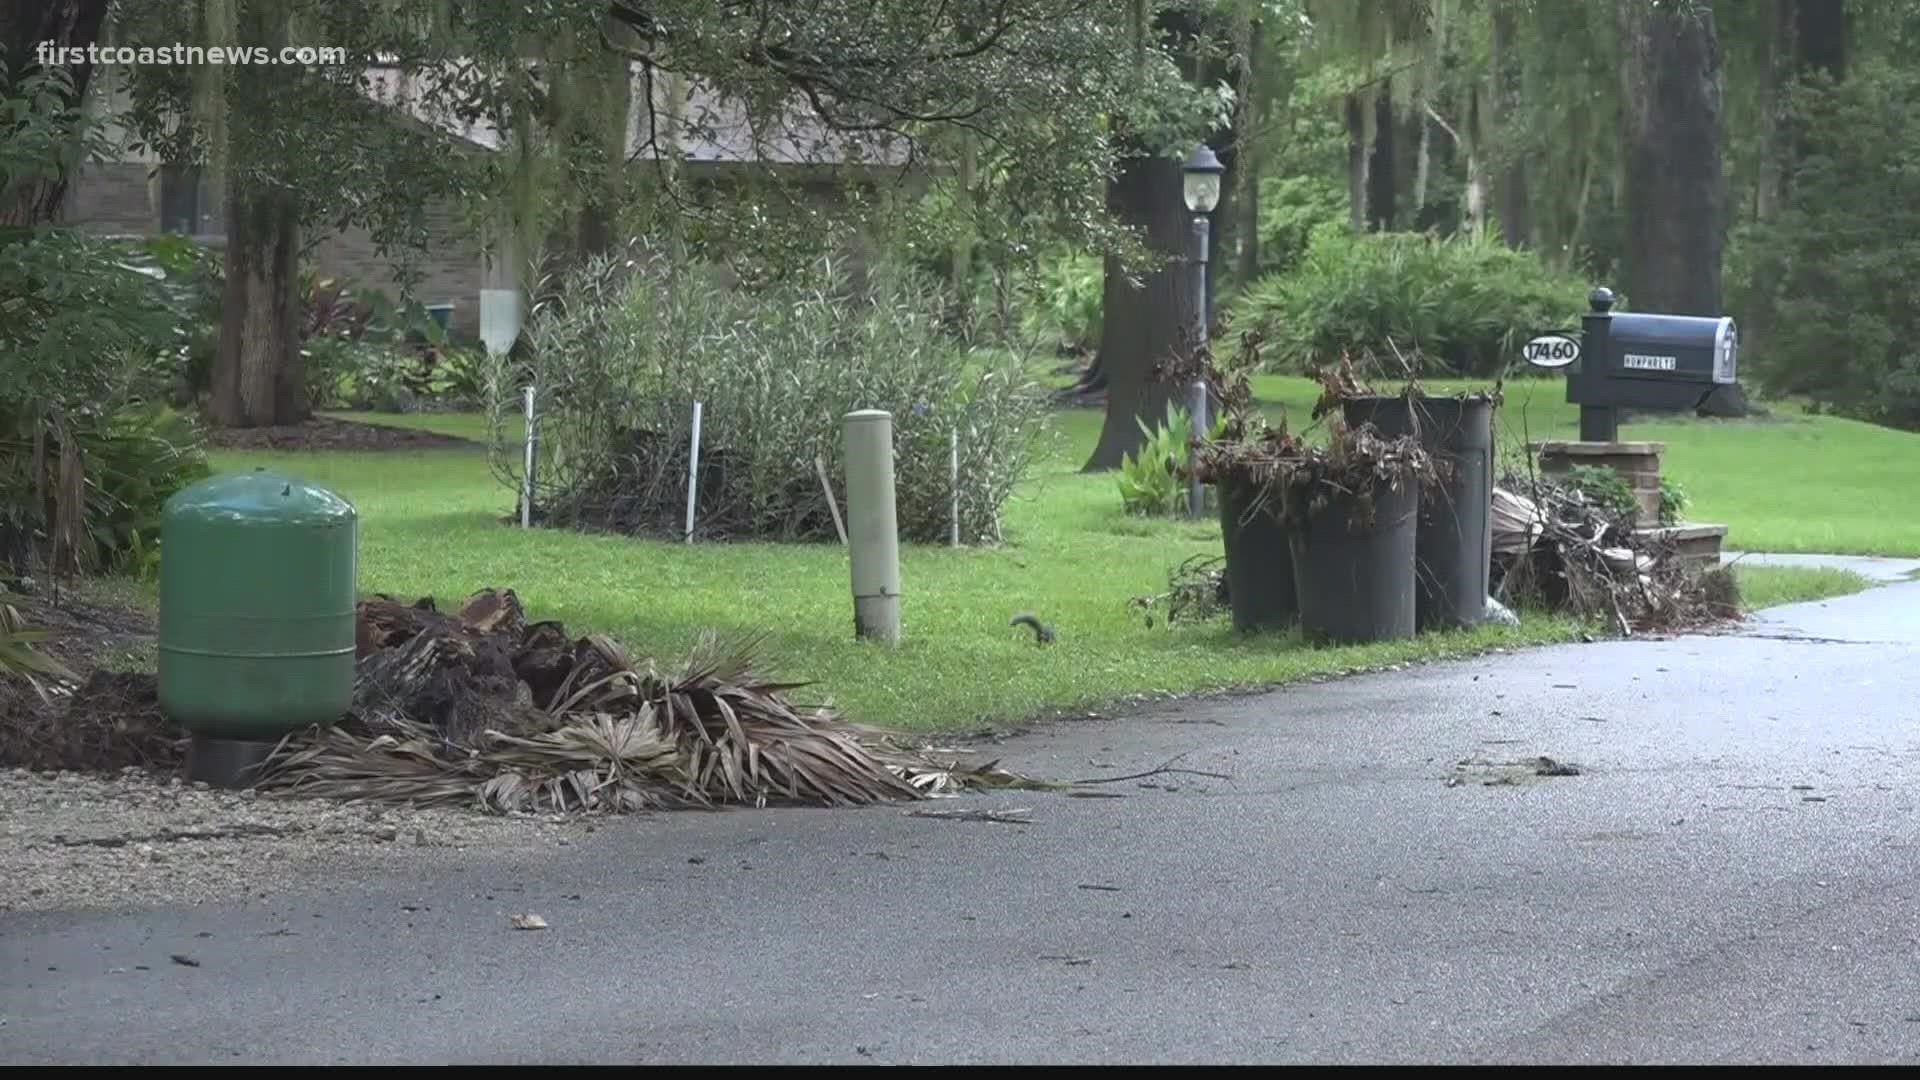 As yard debris pile up around many Jacksonville neighborhoods, Mayor Lenny Curry said Wednesday he wants to suspend recycling to deal with it.